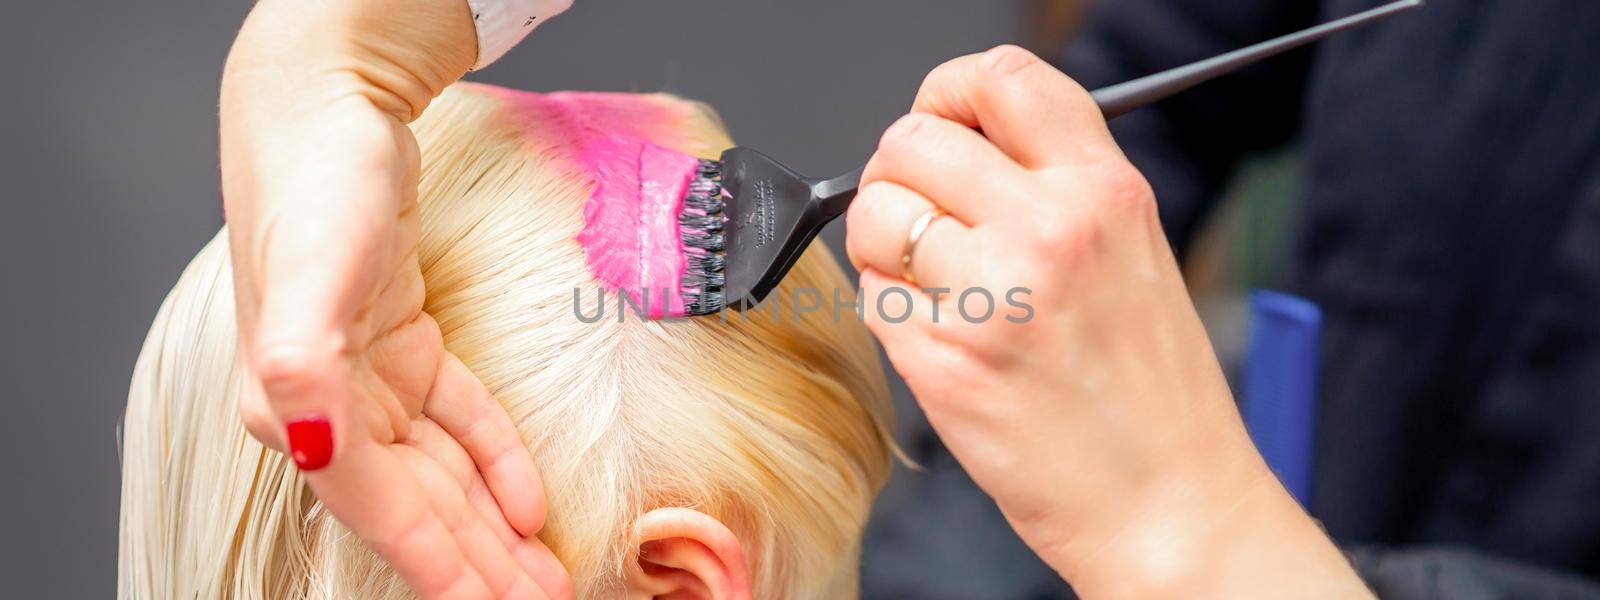 Applying pink dye with the brush on the white hair of a young blonde woman in a hairdresser salon. by okskukuruza